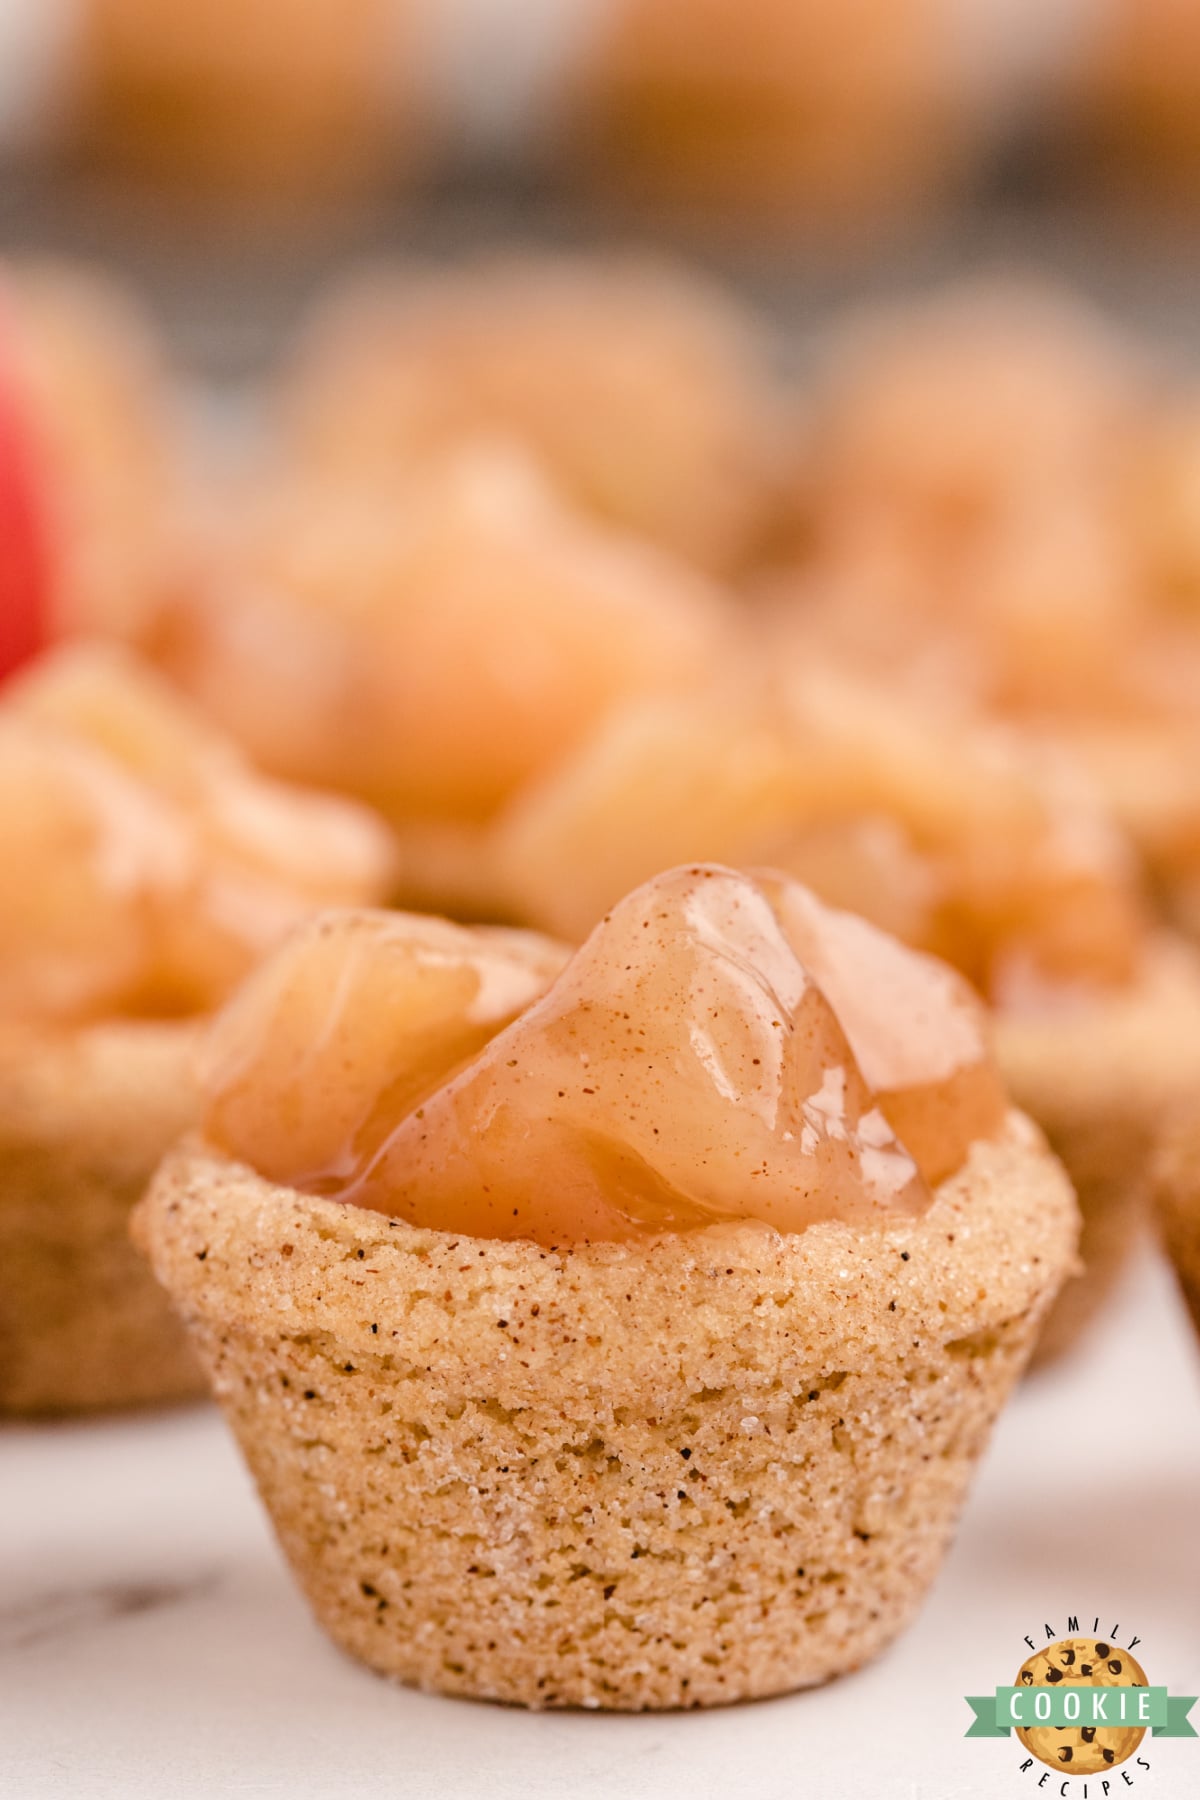 Snickerdoodle cookie cups with apple pie filling